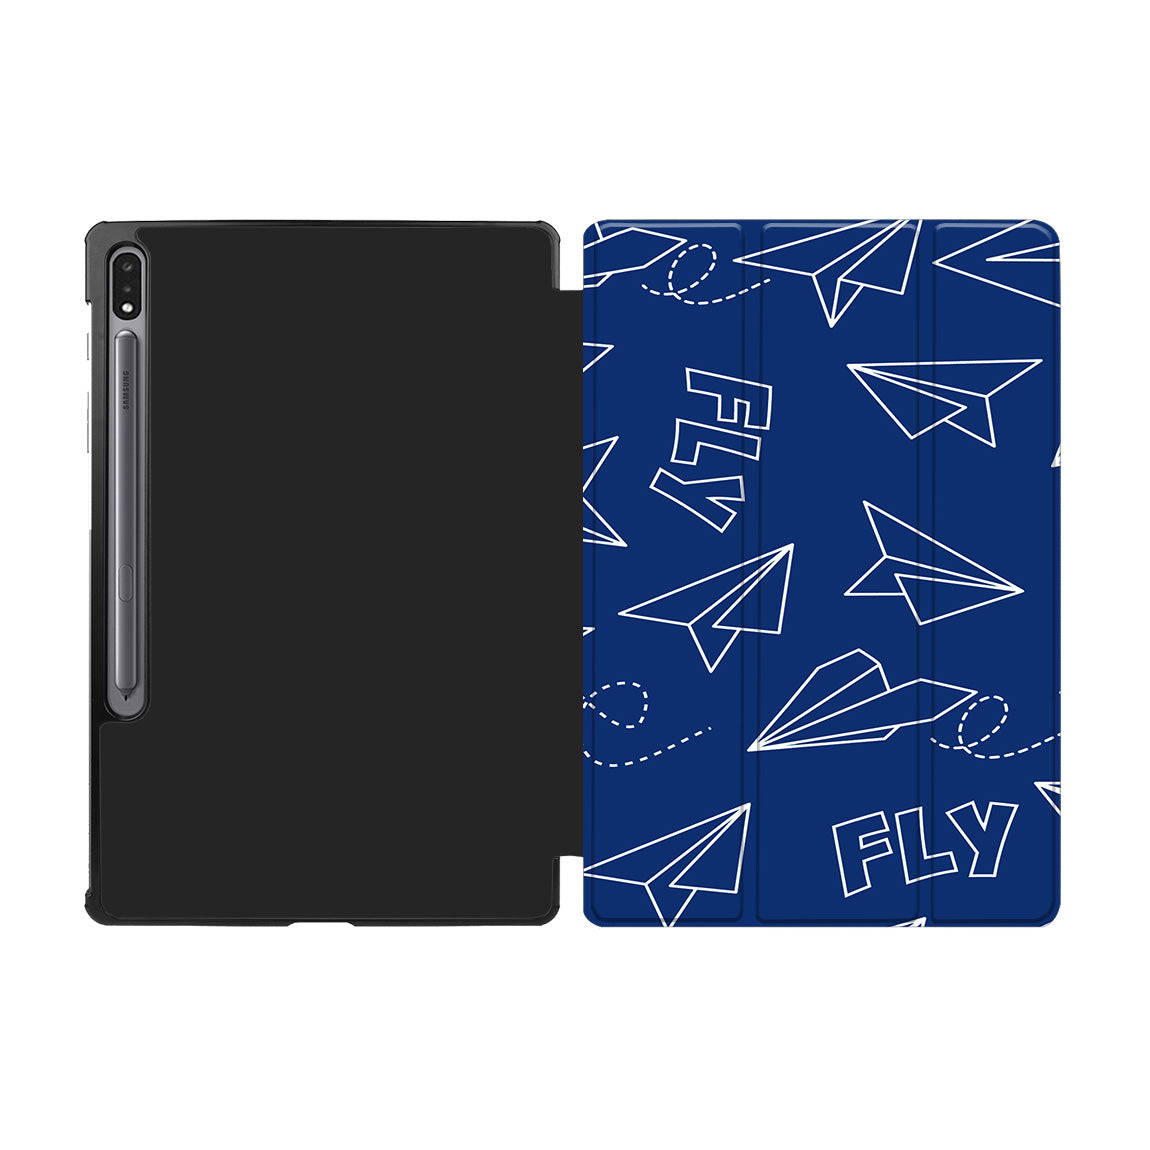 Paper Airplane & Fly-Blue Designed Samsung Tablet Cases